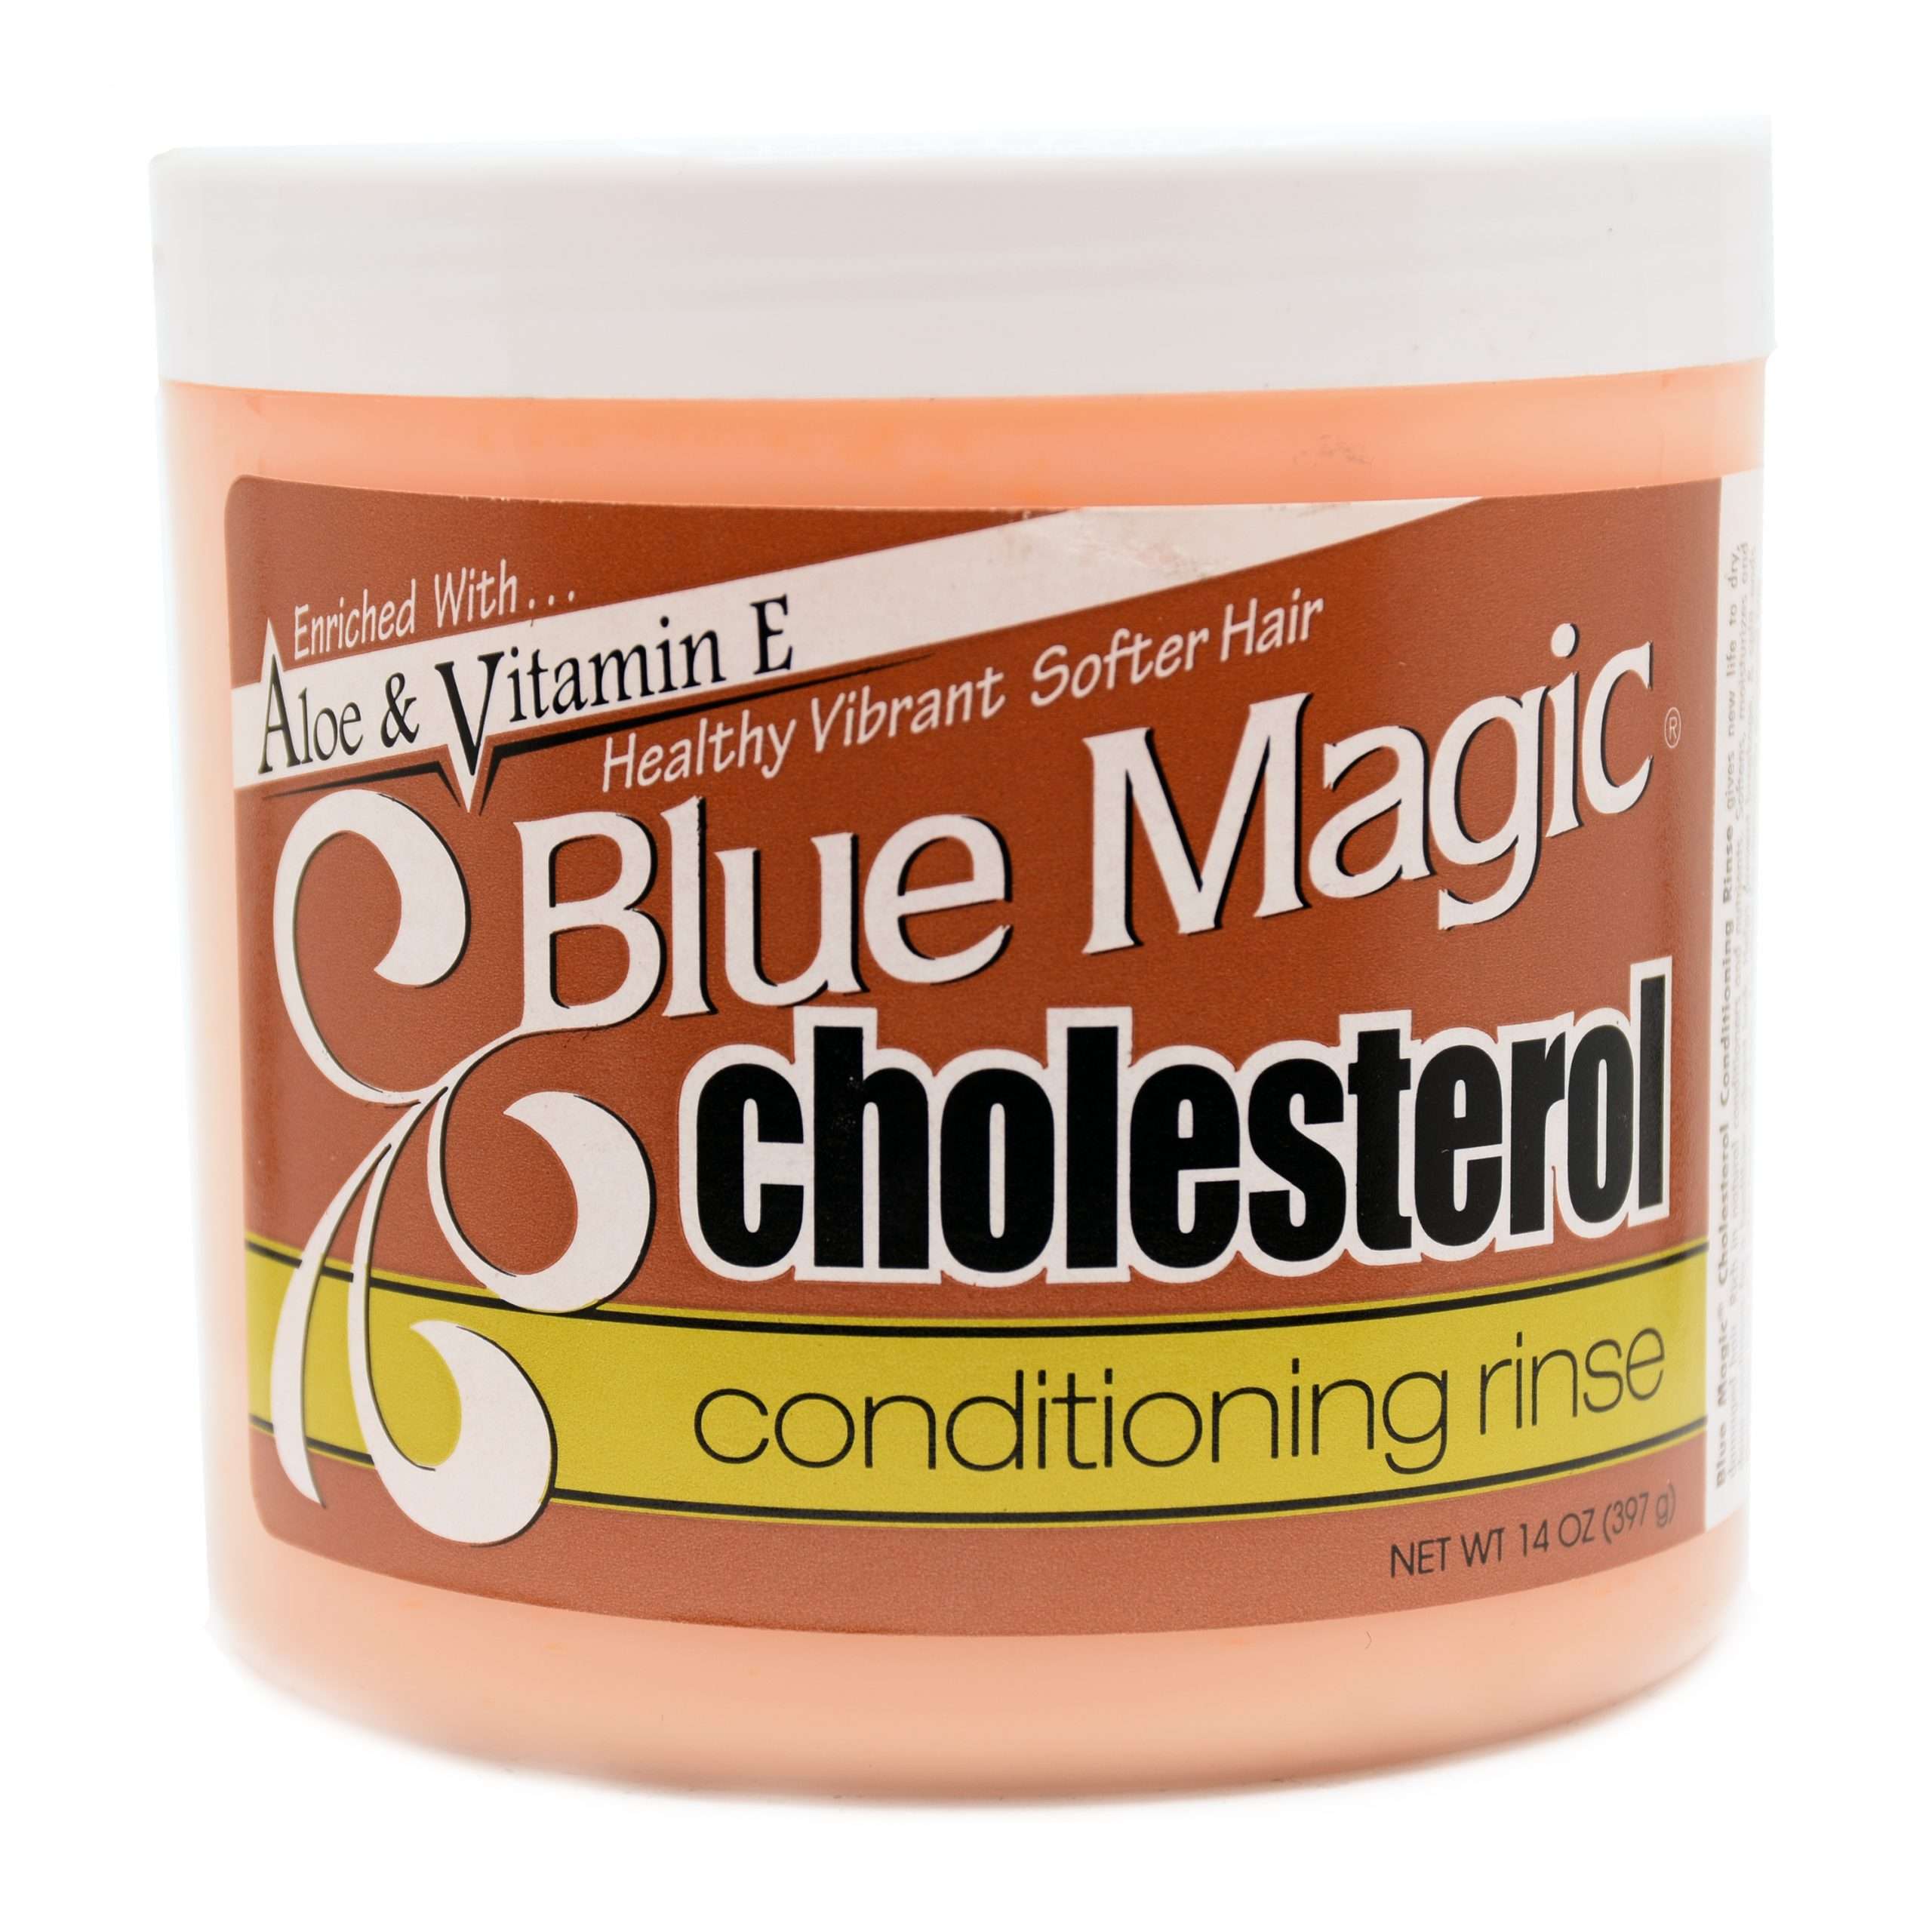 Which Is The Right Cholesterol Conditioner For Hair?  Grab the Best ...